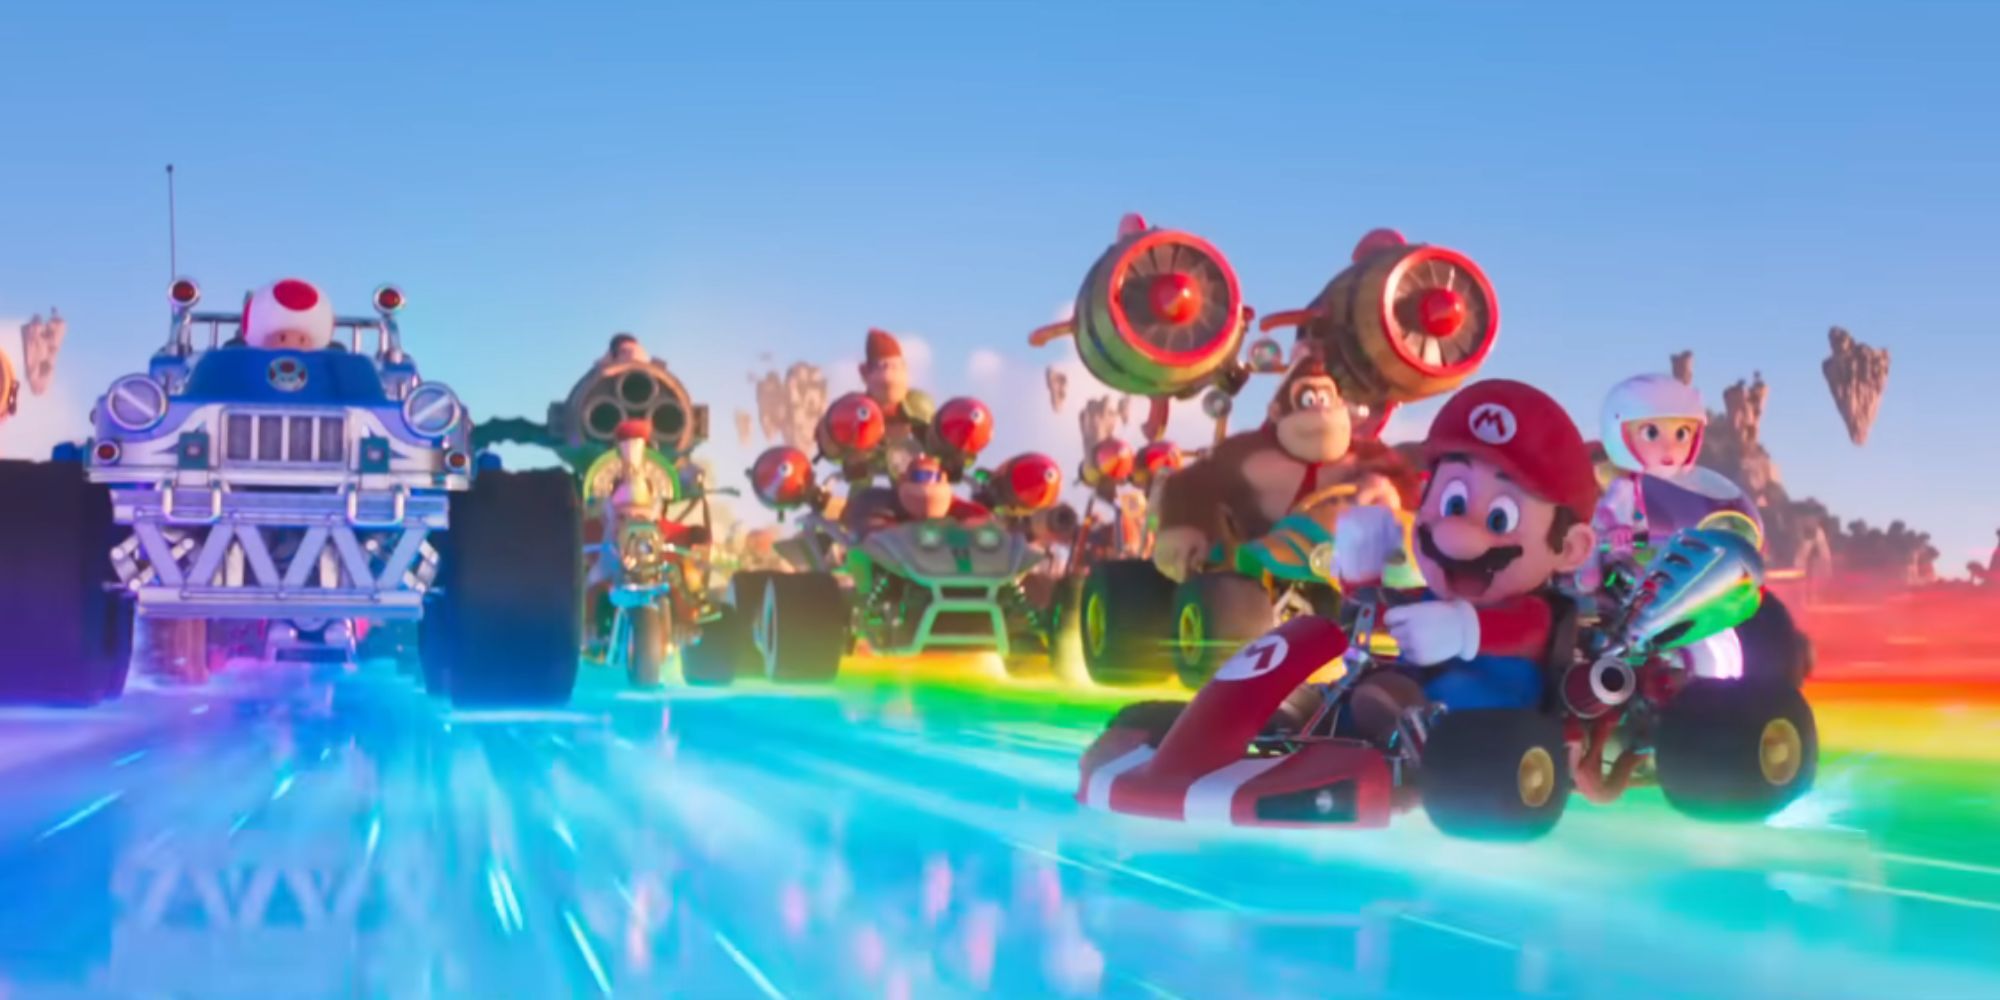 Mario drifts in his kart on Rainbow Road as other characters drive behind him